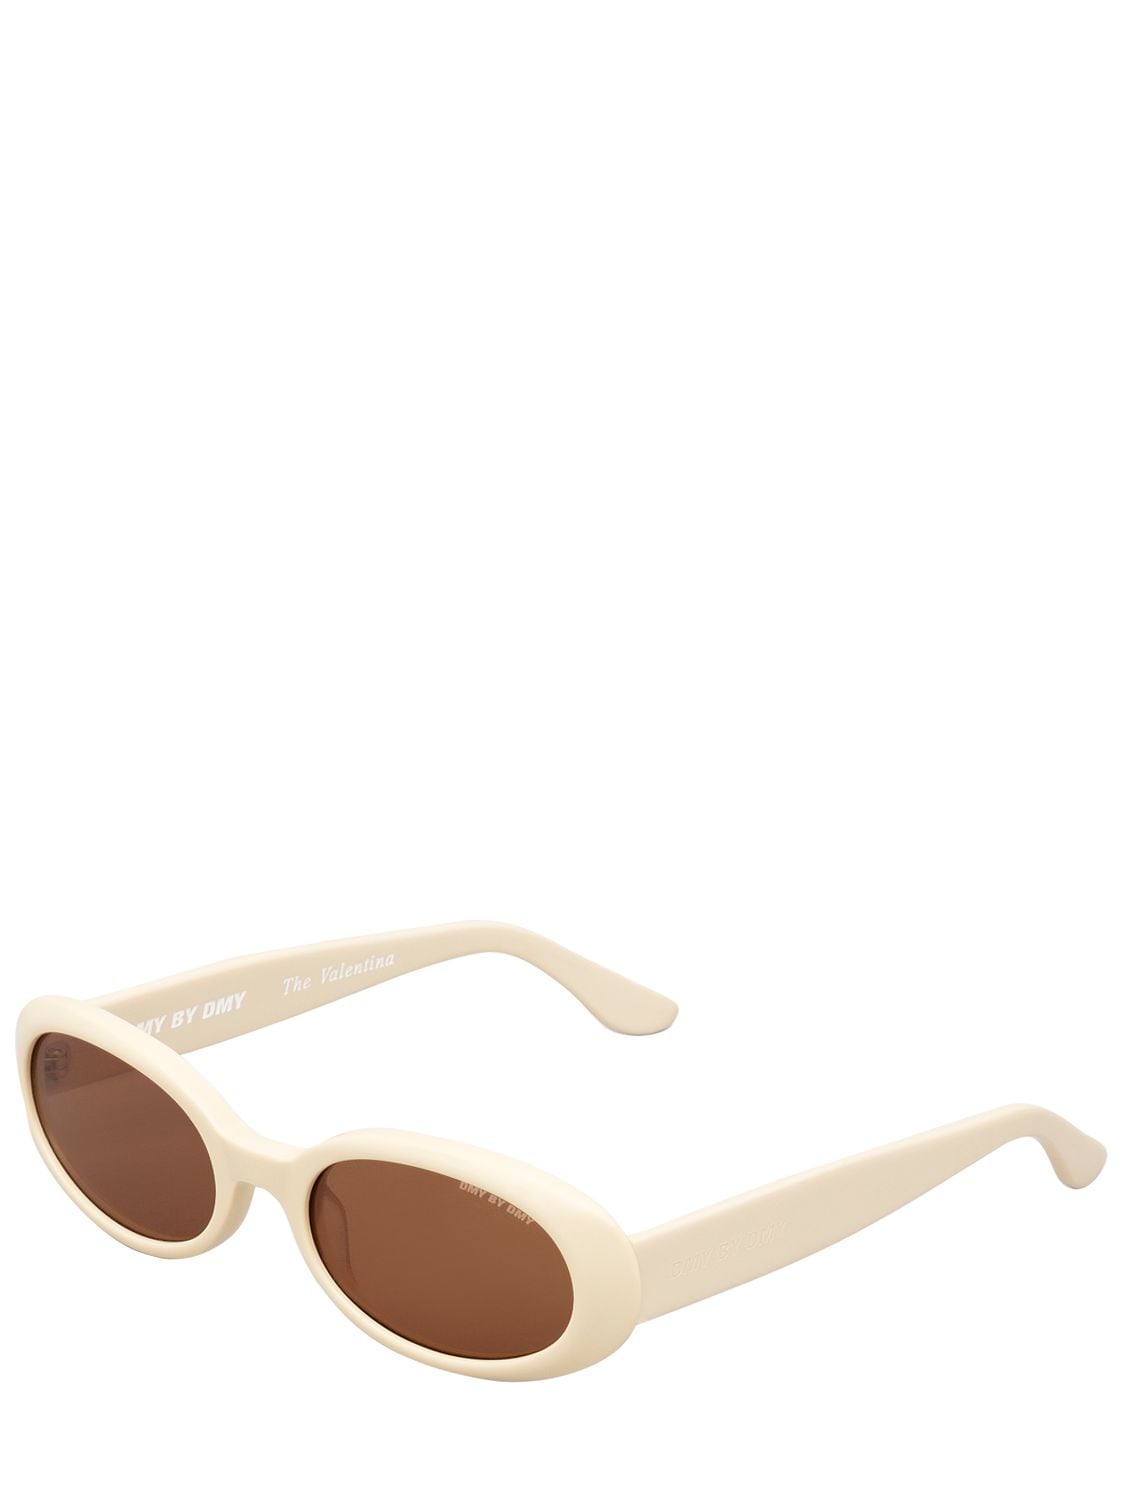 Shop Dmy By Dmy Valentina Oval Acetate Sunglasses In Ivory,brown